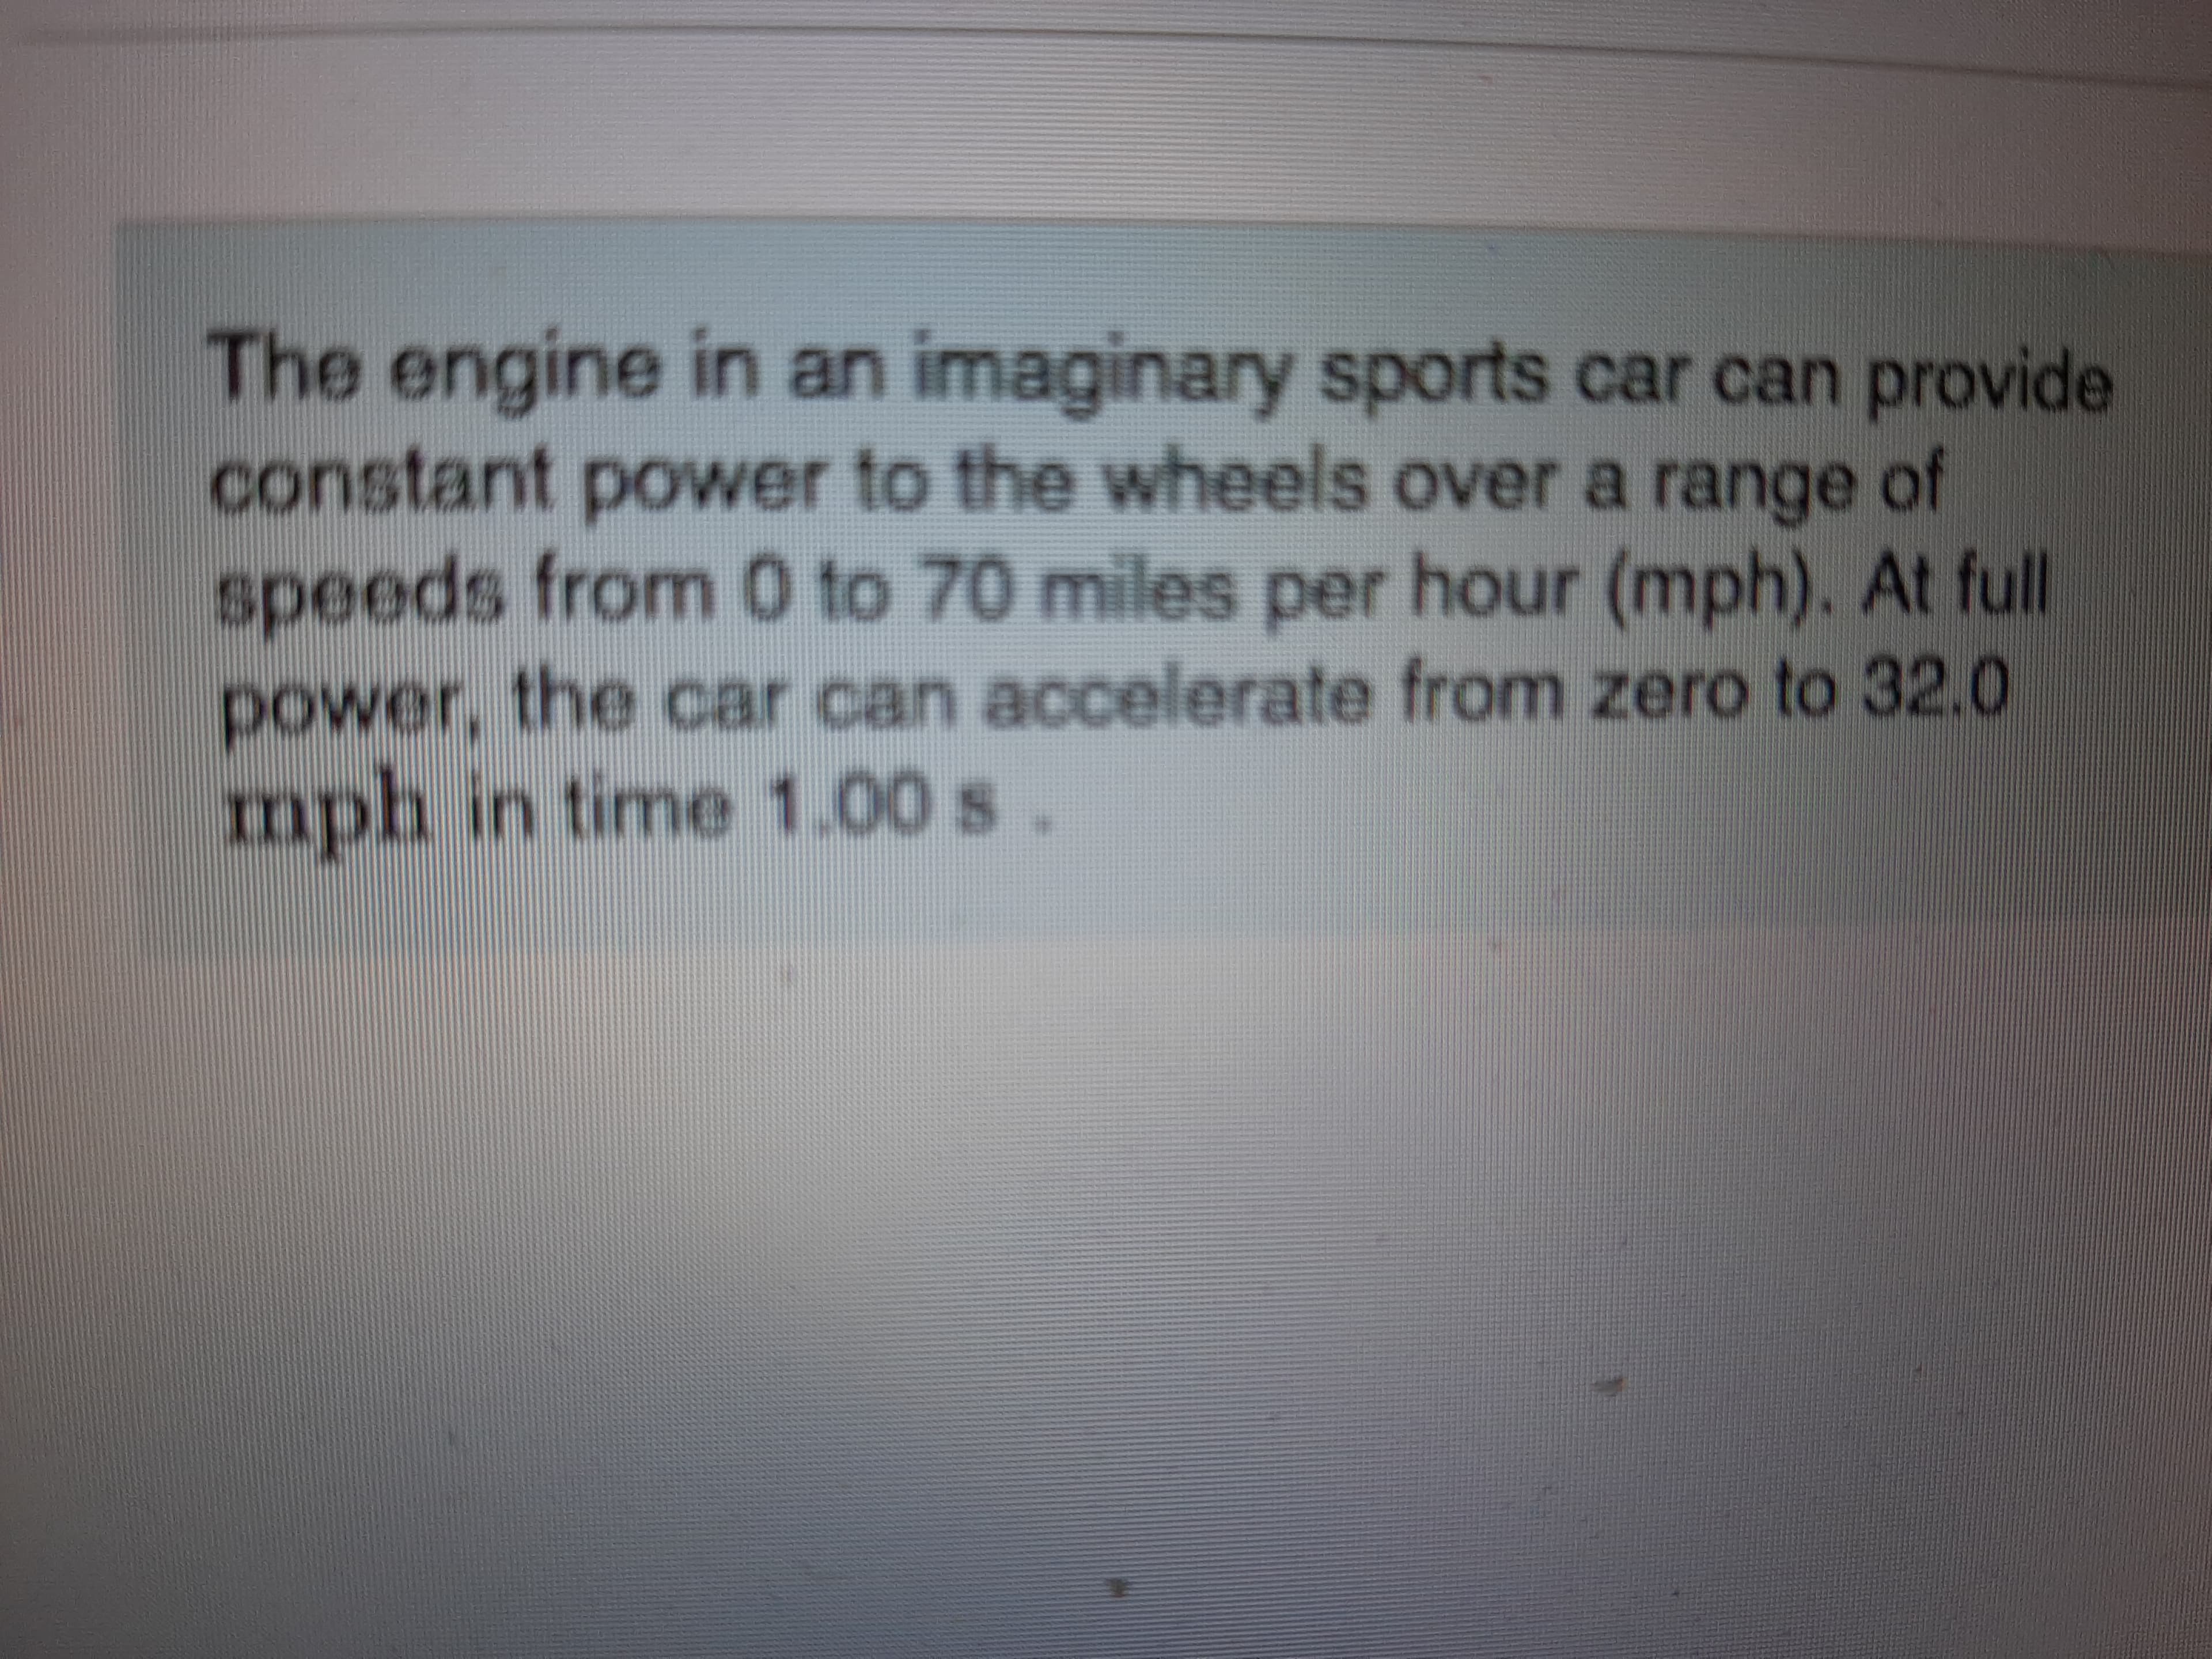 The engine in an imaginary sports car can provide
constant power to the wheels over a range of
speeds from 0 to 70 miles per hour (mph). At full
power, the car can accelerate from zero to 32.0
mph in time 1.00 s.
